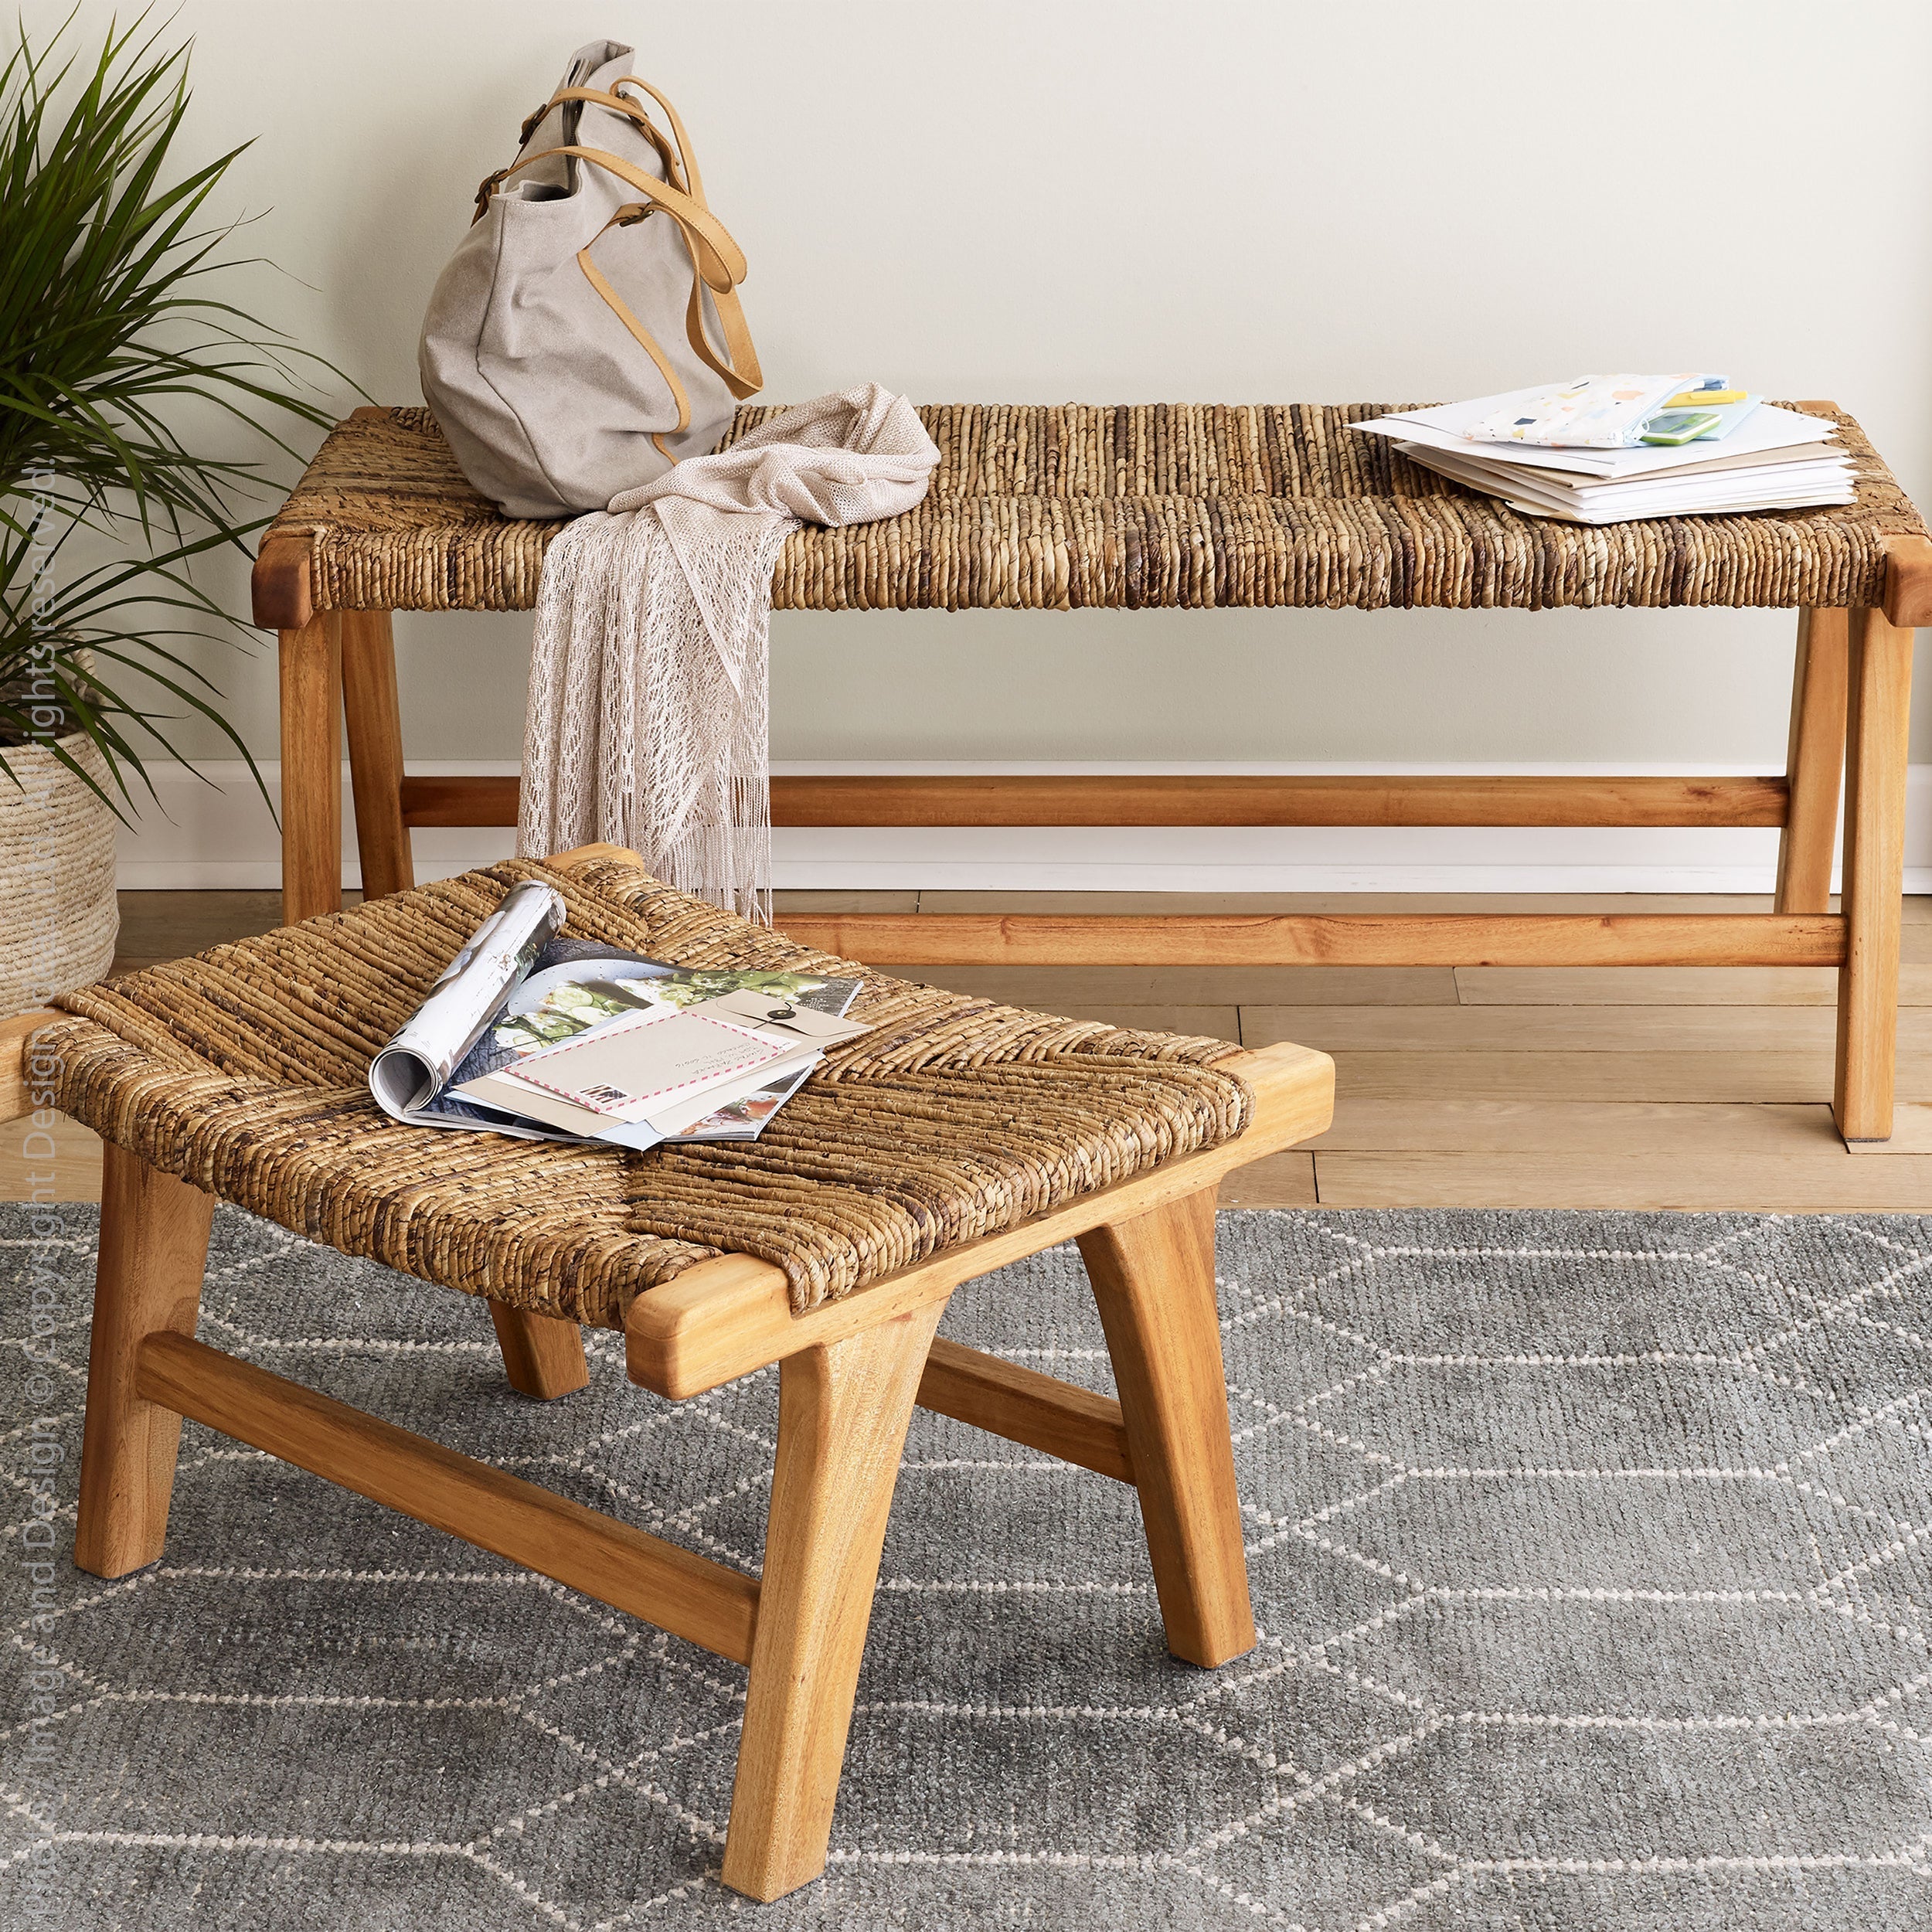 Copenhagen Banana Tree Bark Ottoman   | Image 3 | From the Copenhagen Collection | Exquisitely crafted with natural banana tree bark for long lasting use | Available in natural color | texxture home